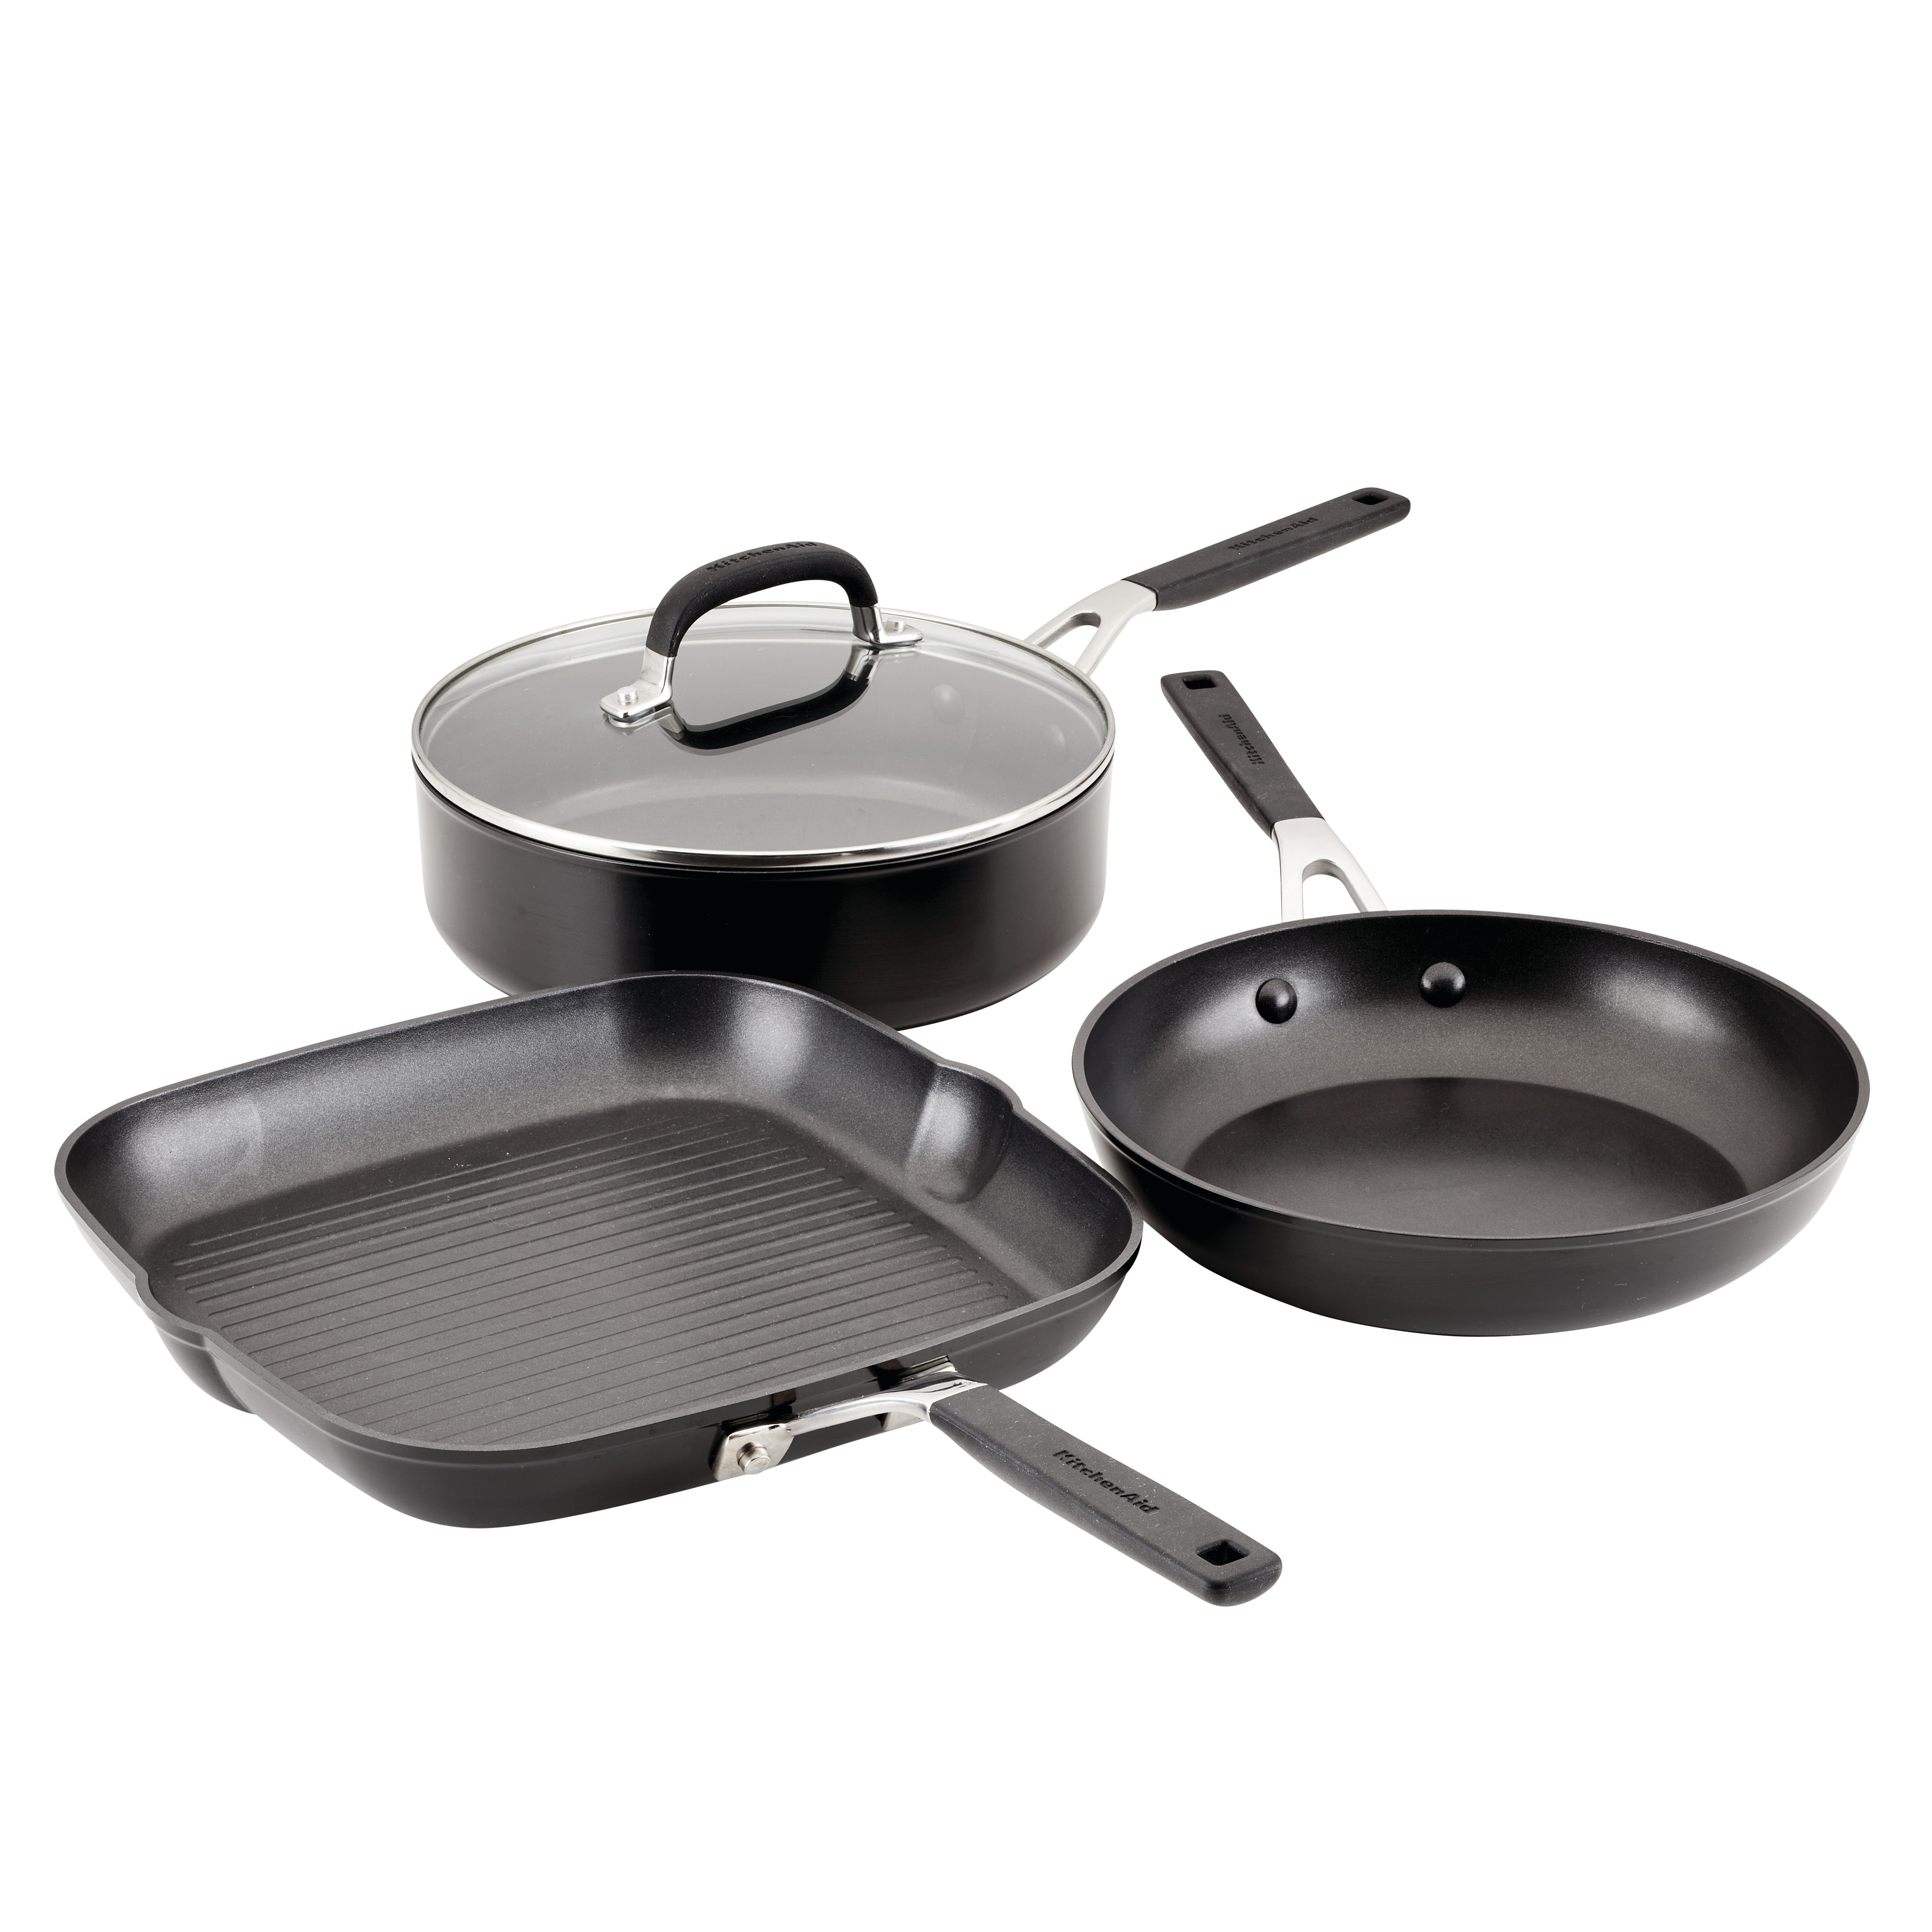 https://ak1.ostkcdn.com/images/products/is/images/direct/889a62c8814c09b1d8022384dd4cd99a5cacf482/KitchenAid-Hard-Anodized-Nonstick-Cookware-Pots-and-Pans-Set%2C-4-Piece%2C-Onyx-Black.jpg